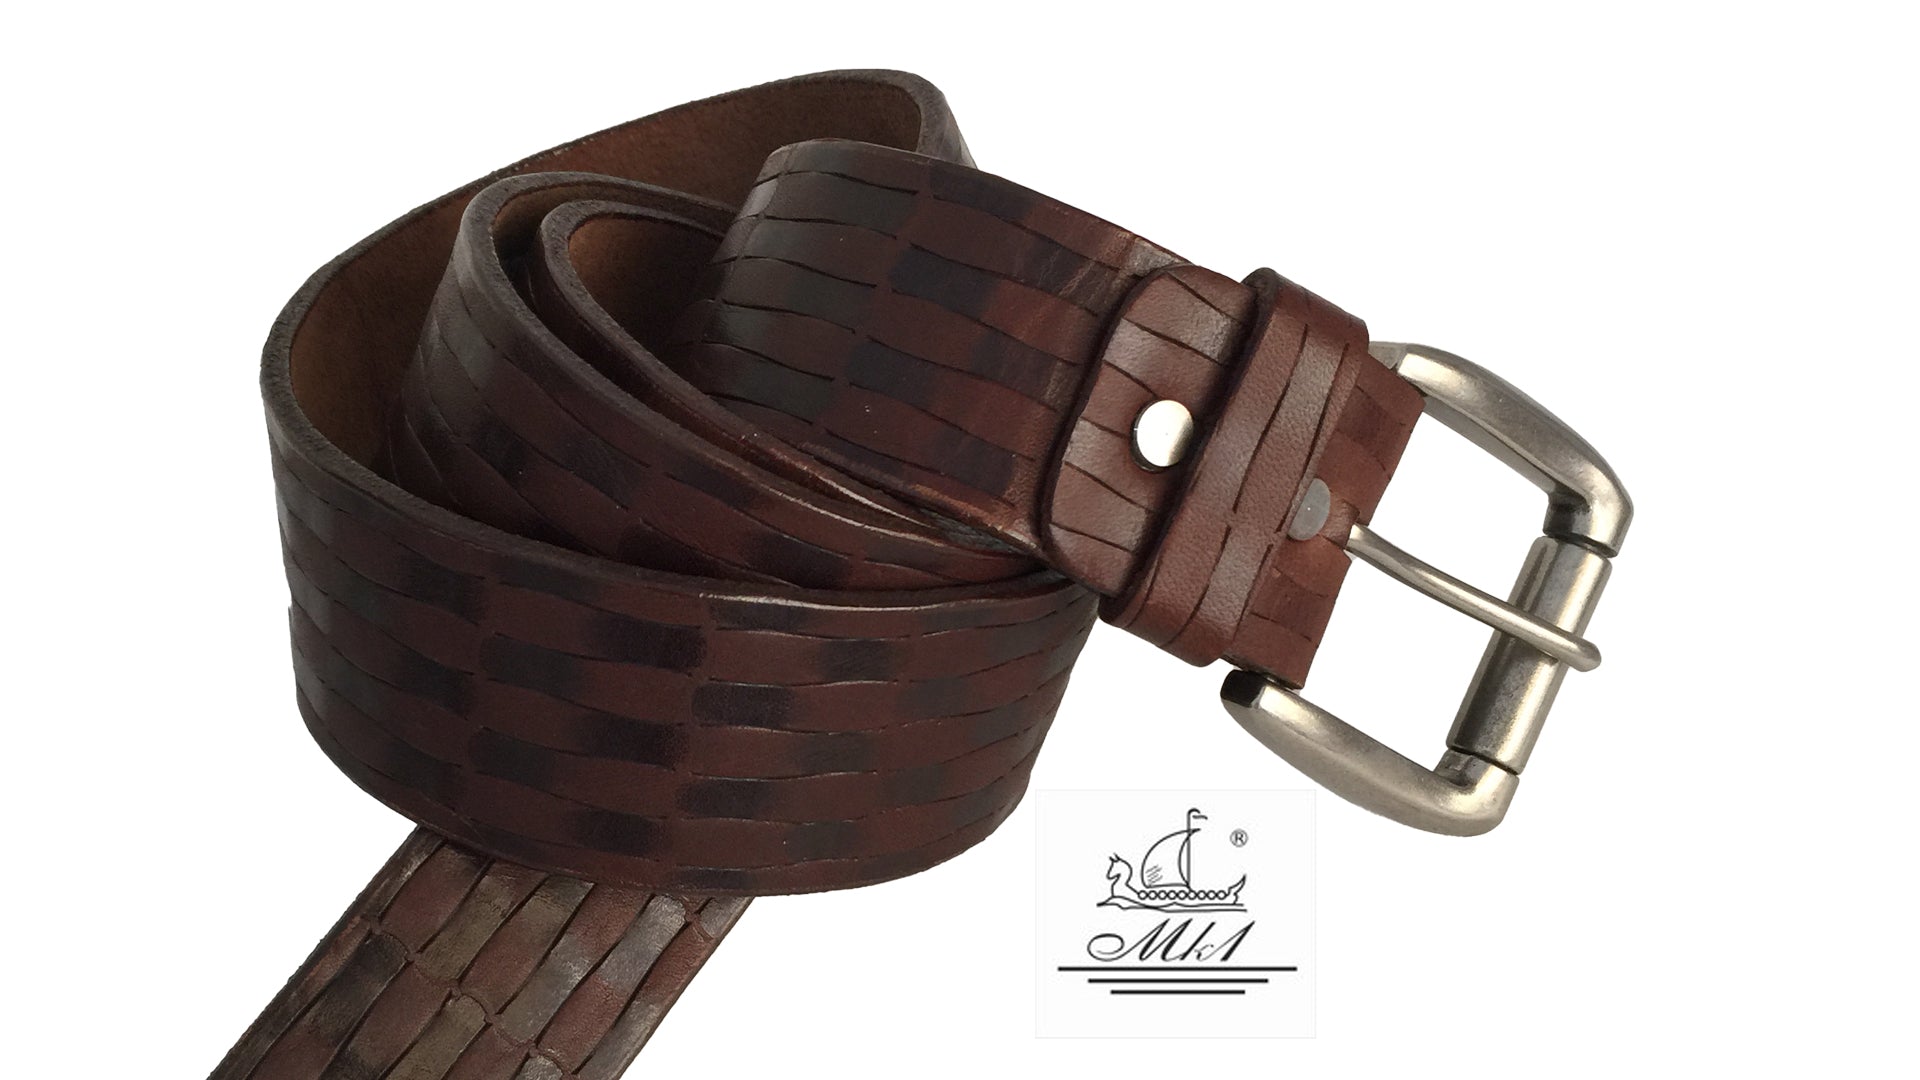 22/40k-psx Hand made  leather belt, 4 cm width, and  roll buckle.